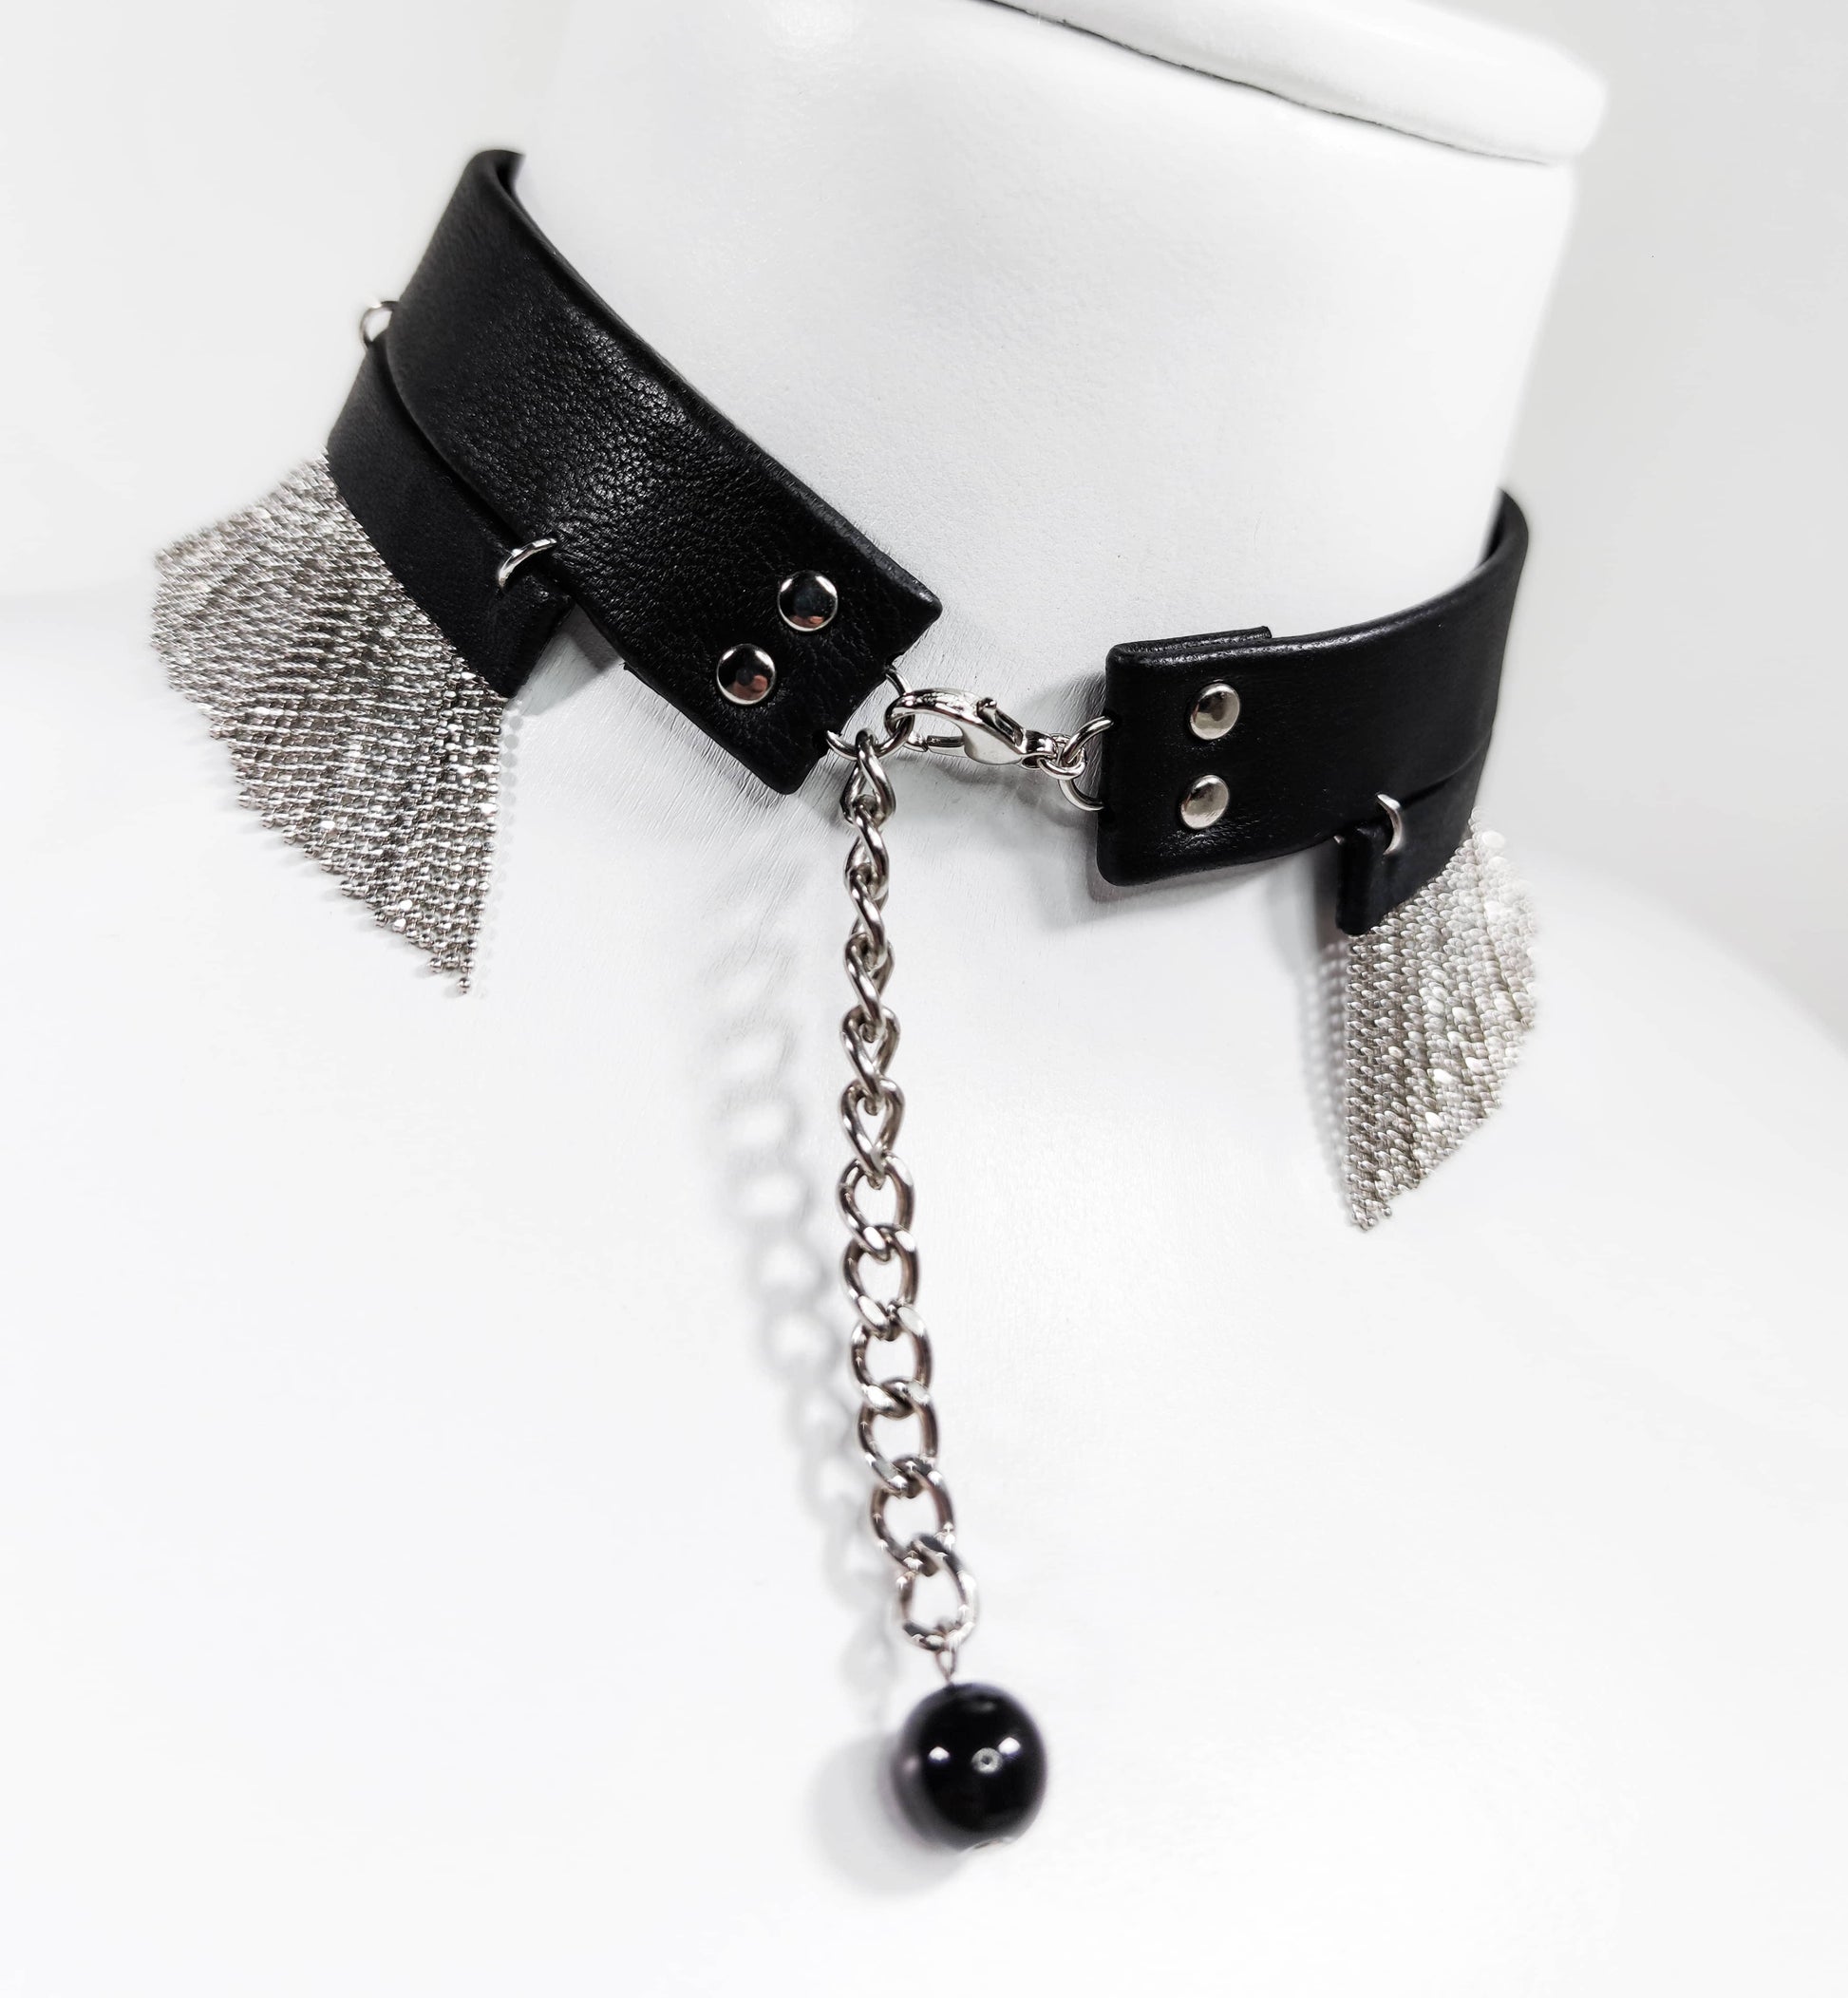 Exquisite detail of Short Leather Chocker with Chains showcasing the fine craftsmanship and elegant design characteristic of Axinia Collection 's luxury collection.